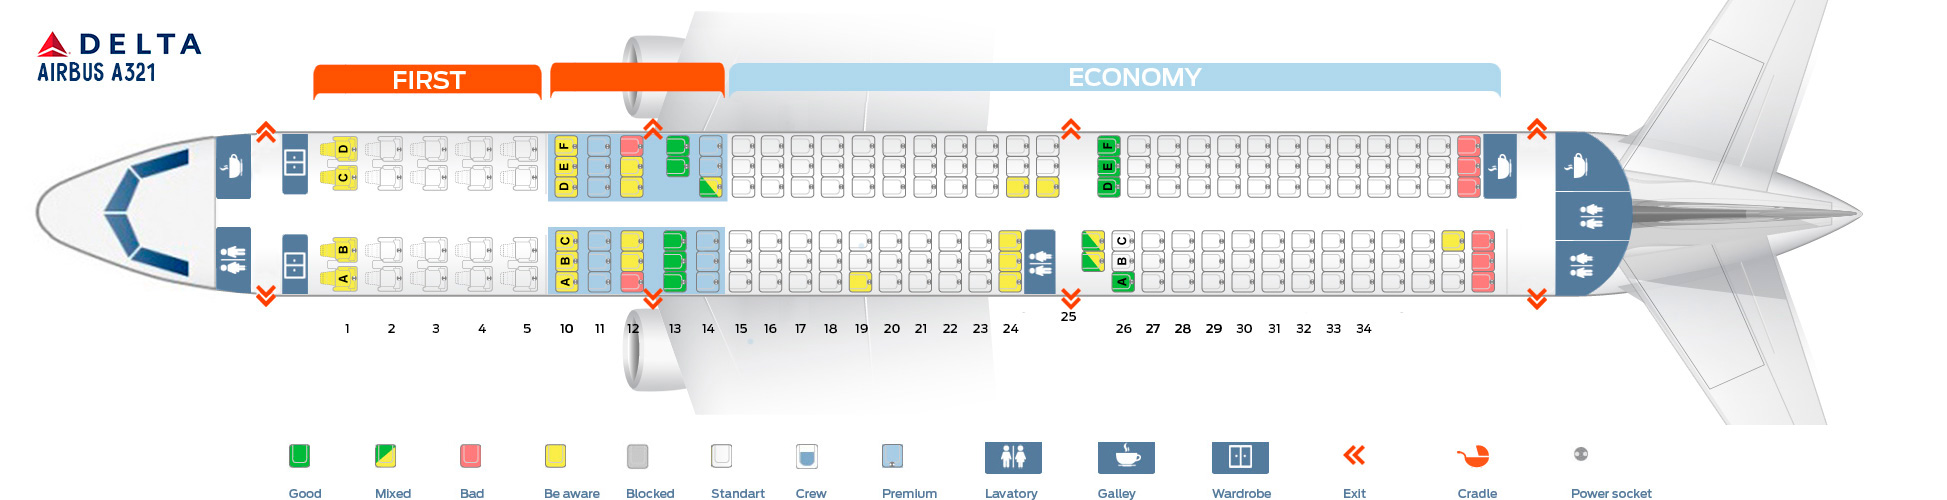 Seat map Airbus A321 Delta Air Lines